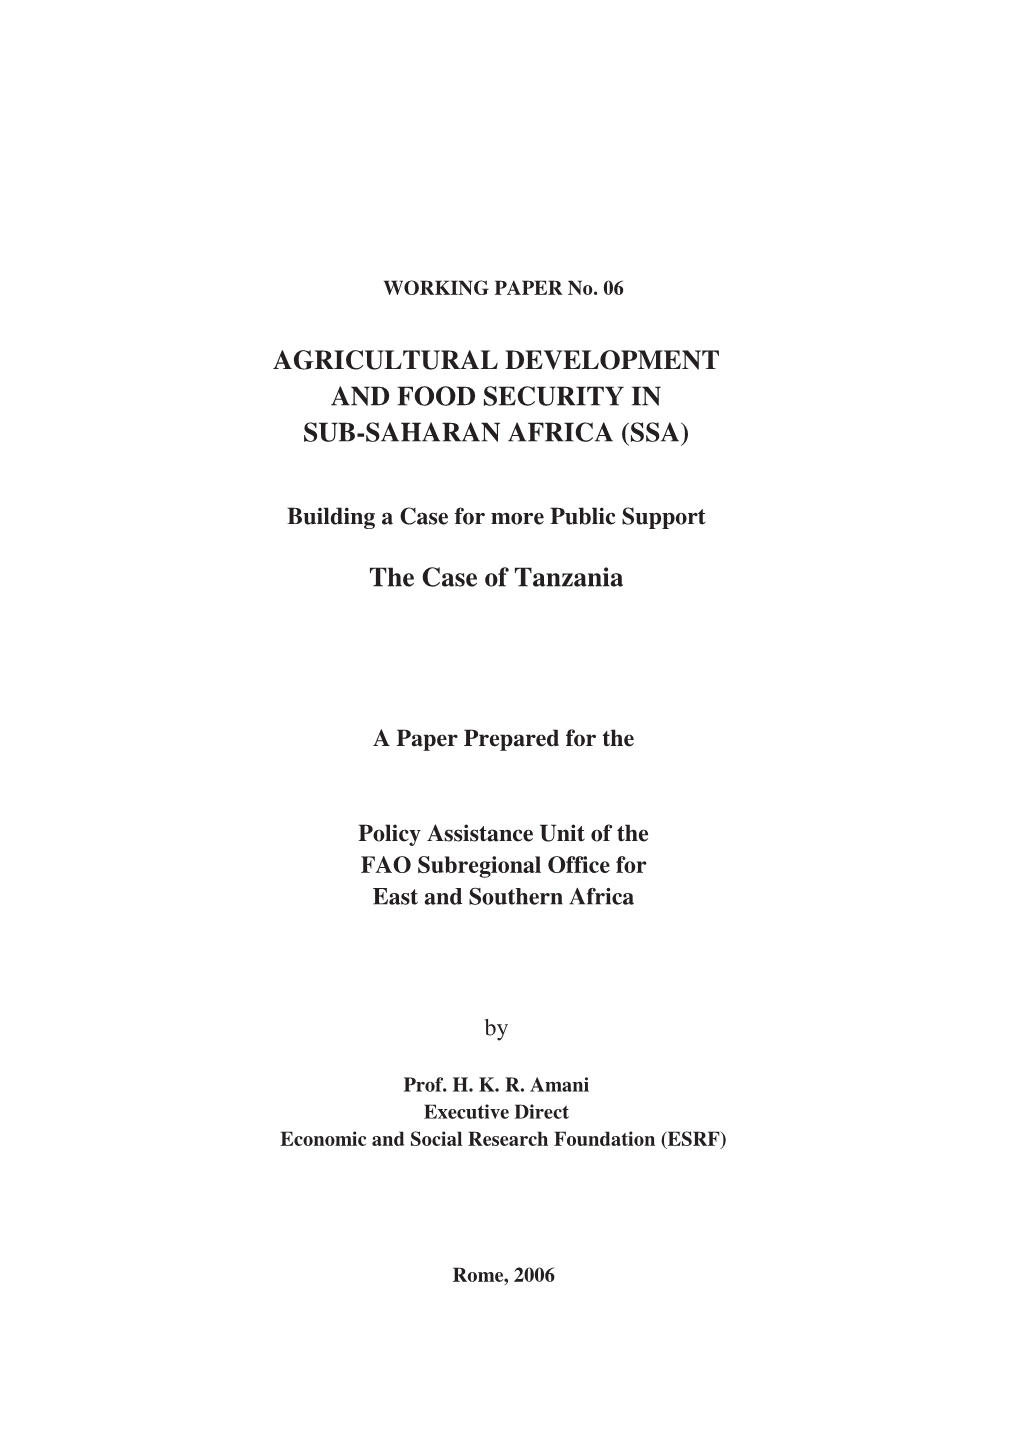 AGRICULTURAL DEVELOPMENT and FOOD SECURITY in SUB-SAHARAN AFRICA (SSA) the Case of Tanzania